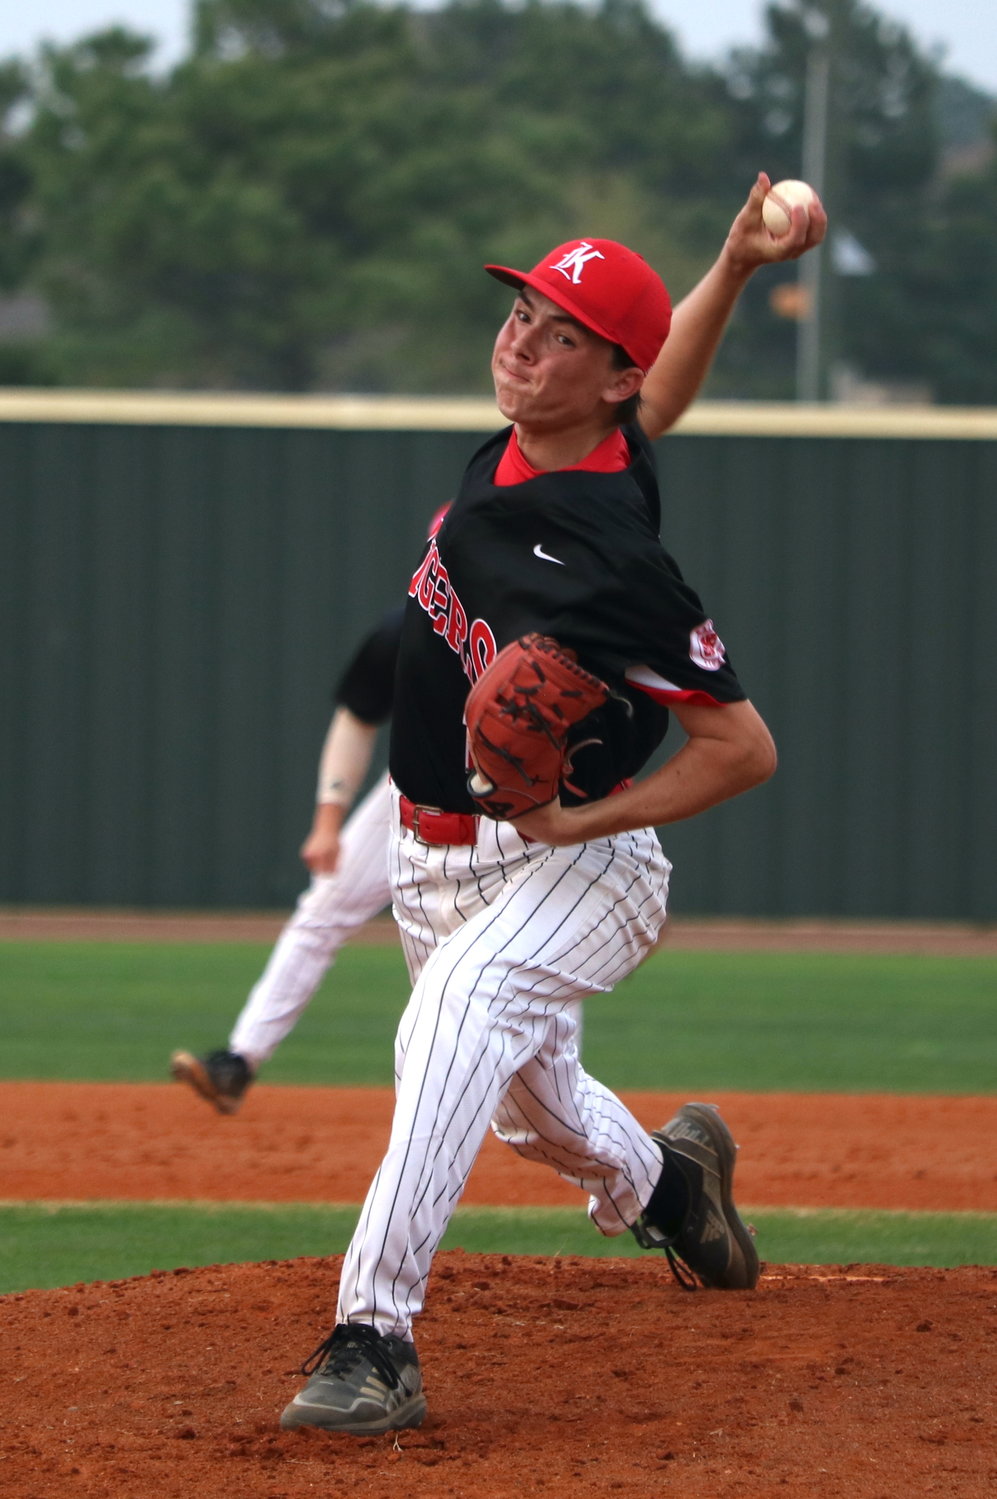 Lucas Moore pitches during Tuesday’s District 19-6A game between Katy and Tompkins at the Tompkins baseball field.